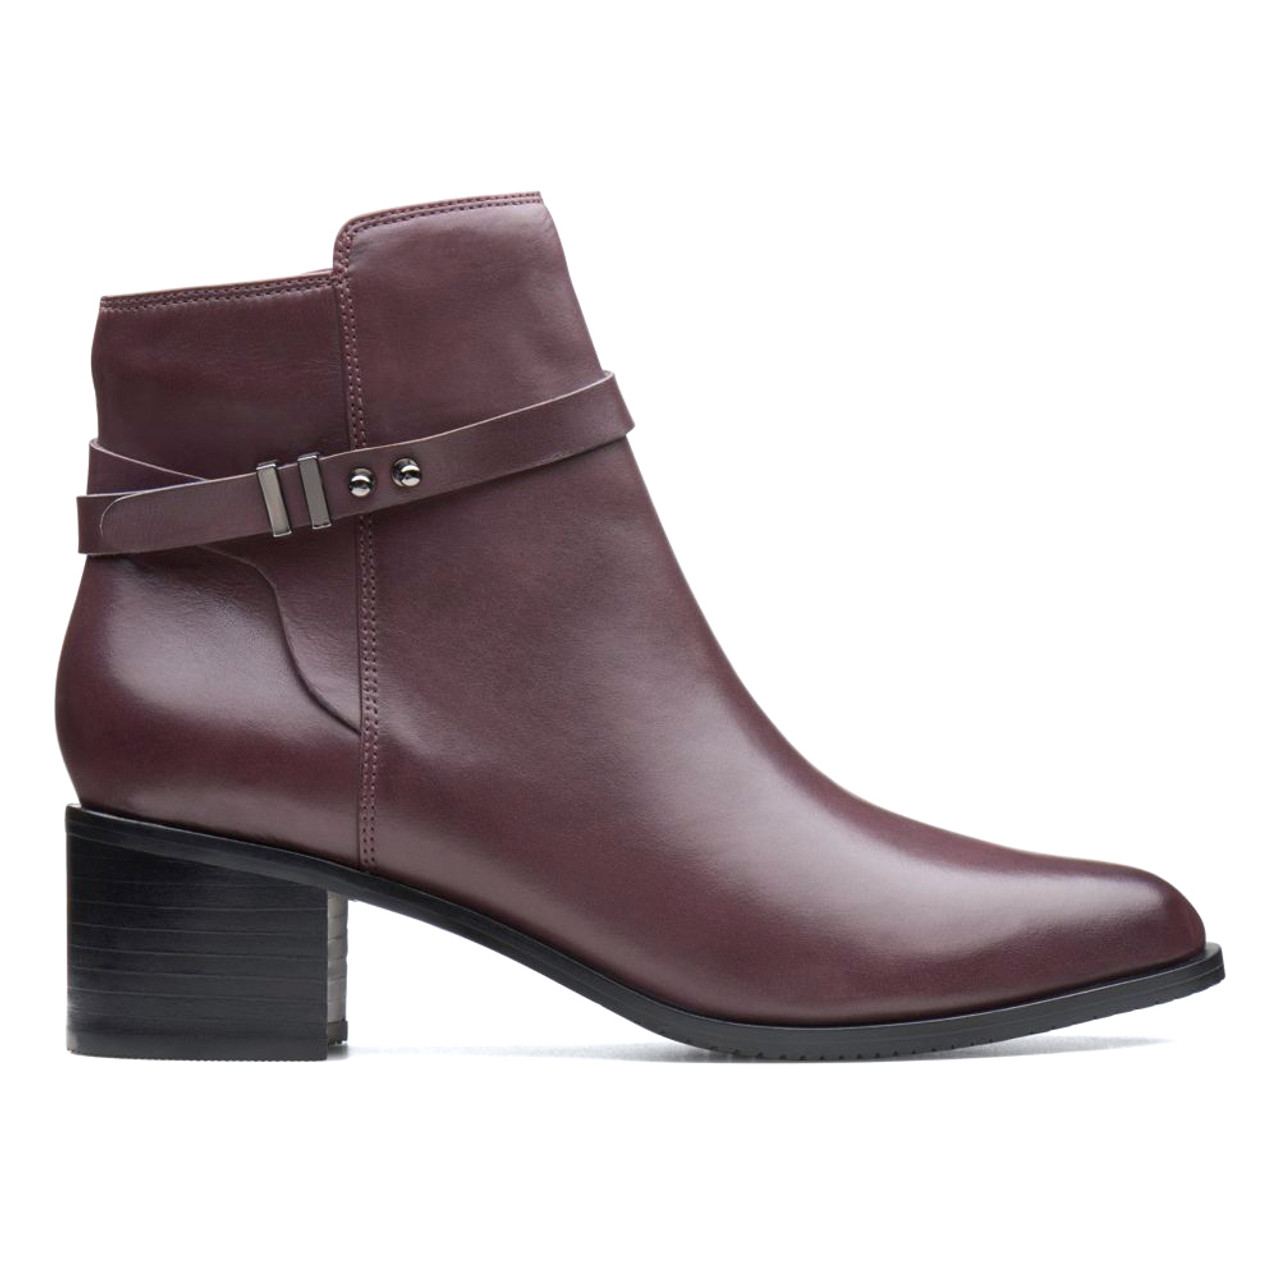 clarks freya boot off 66% - online-sms.in